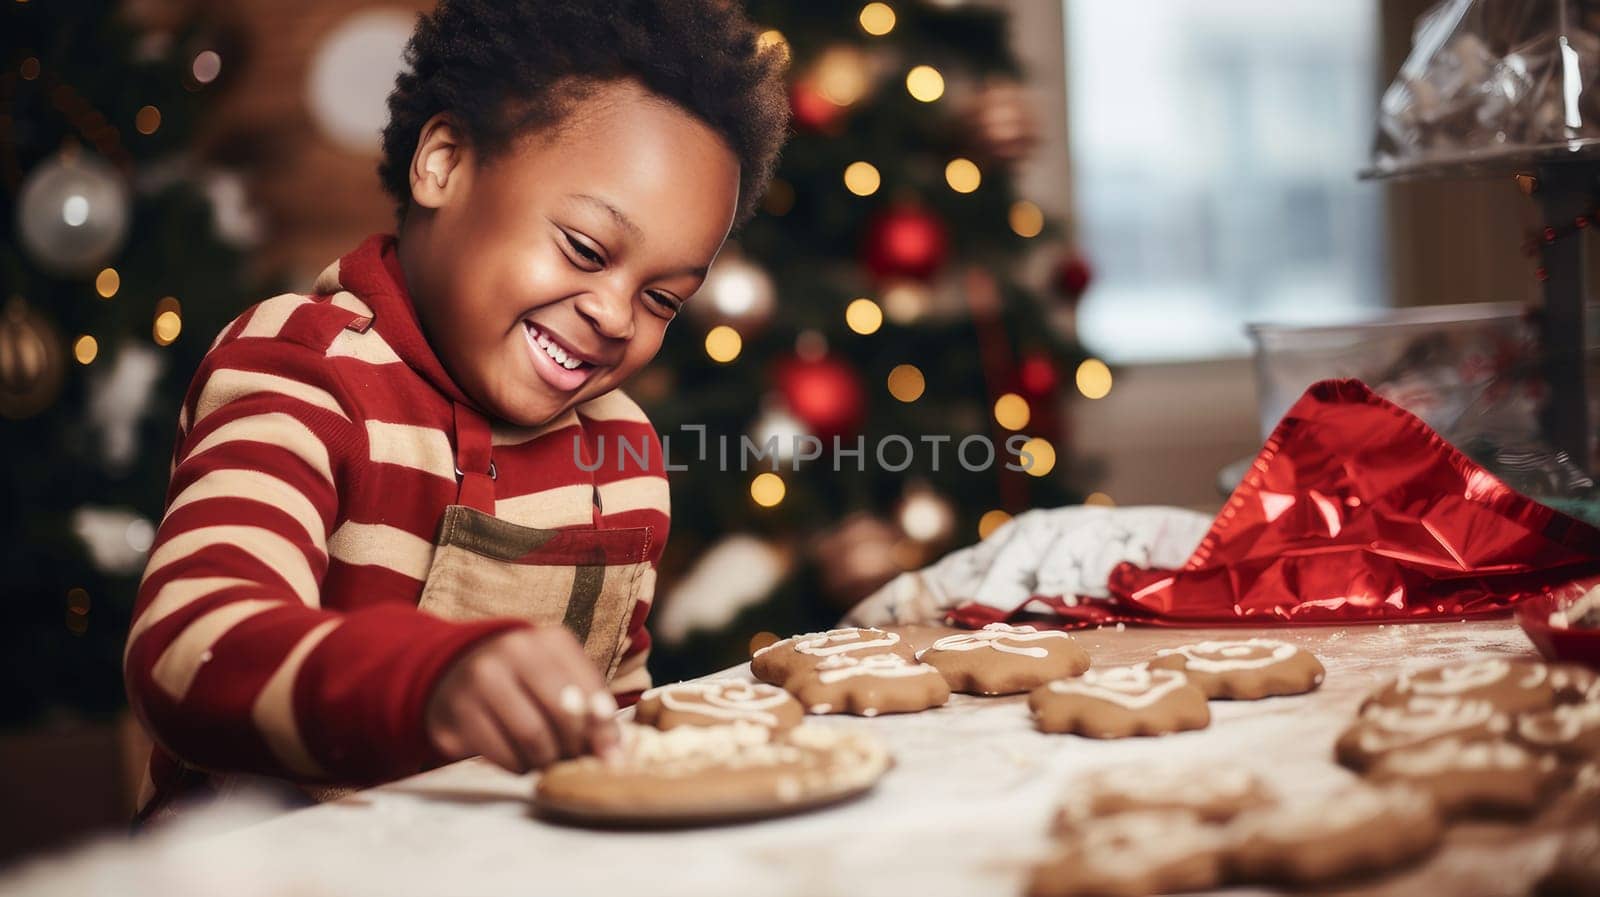 Smiling African American child with Down syndrome decorates Christmas cookies. Merry Christmas and Happy New Year concept. by Alla_Yurtayeva